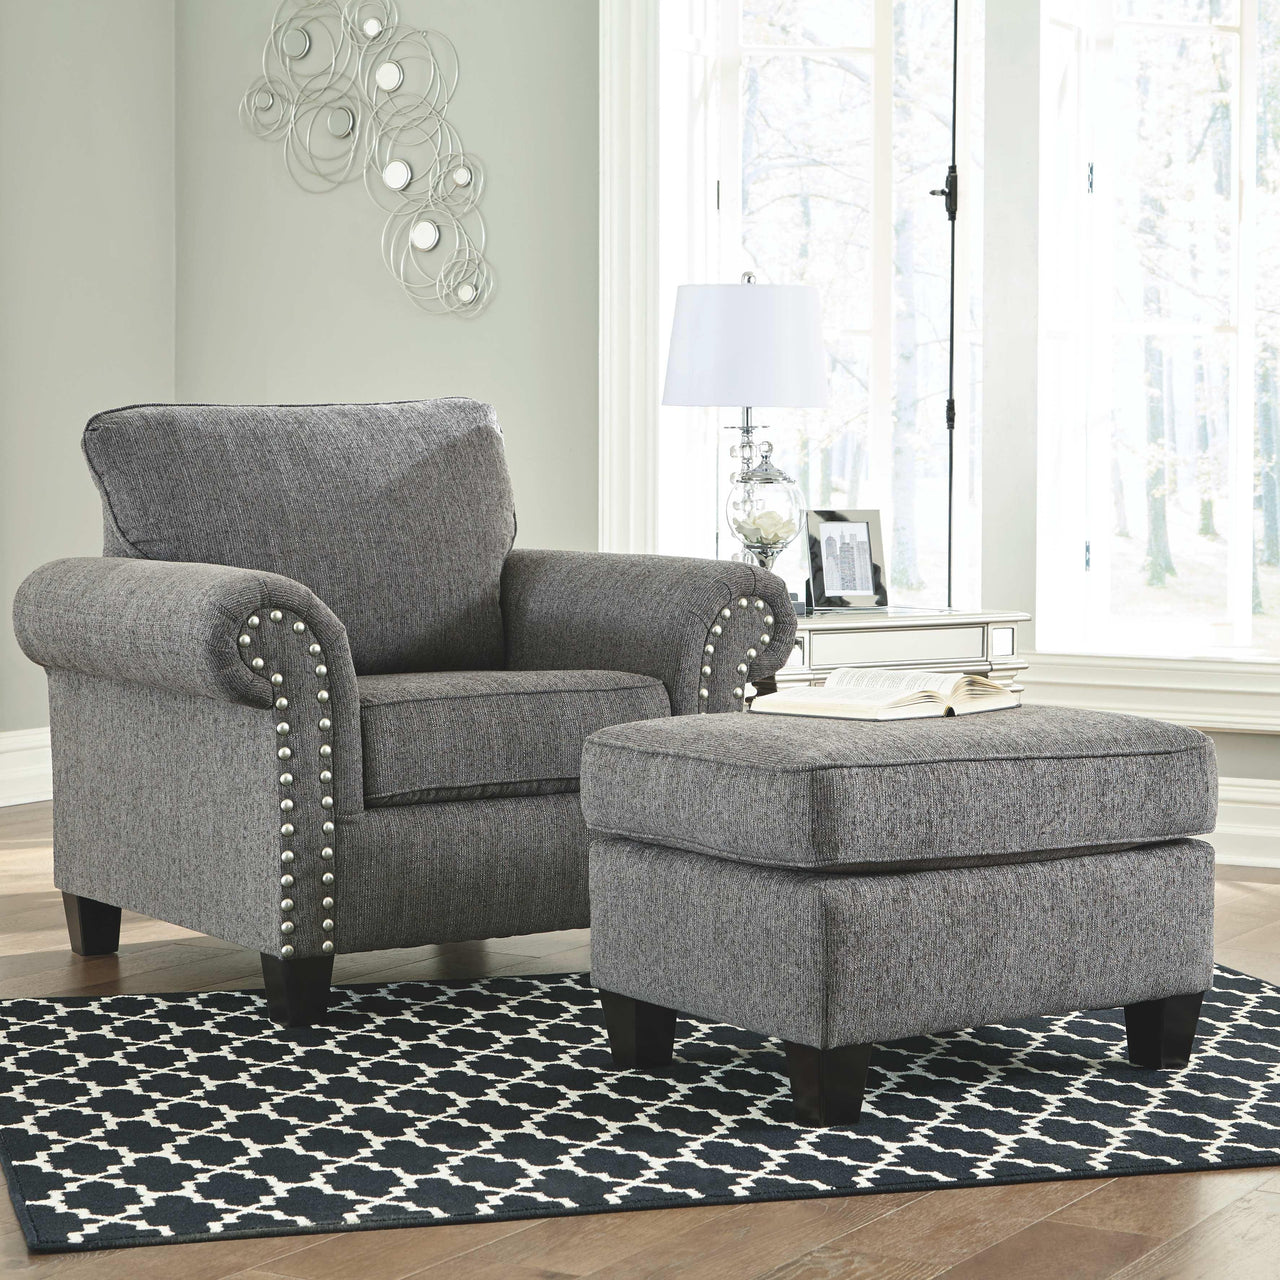 Agleno - Charcoal - 2 Pc. - Chair With Ottoman Tony's Home Furnishings Furniture. Beds. Dressers. Sofas.